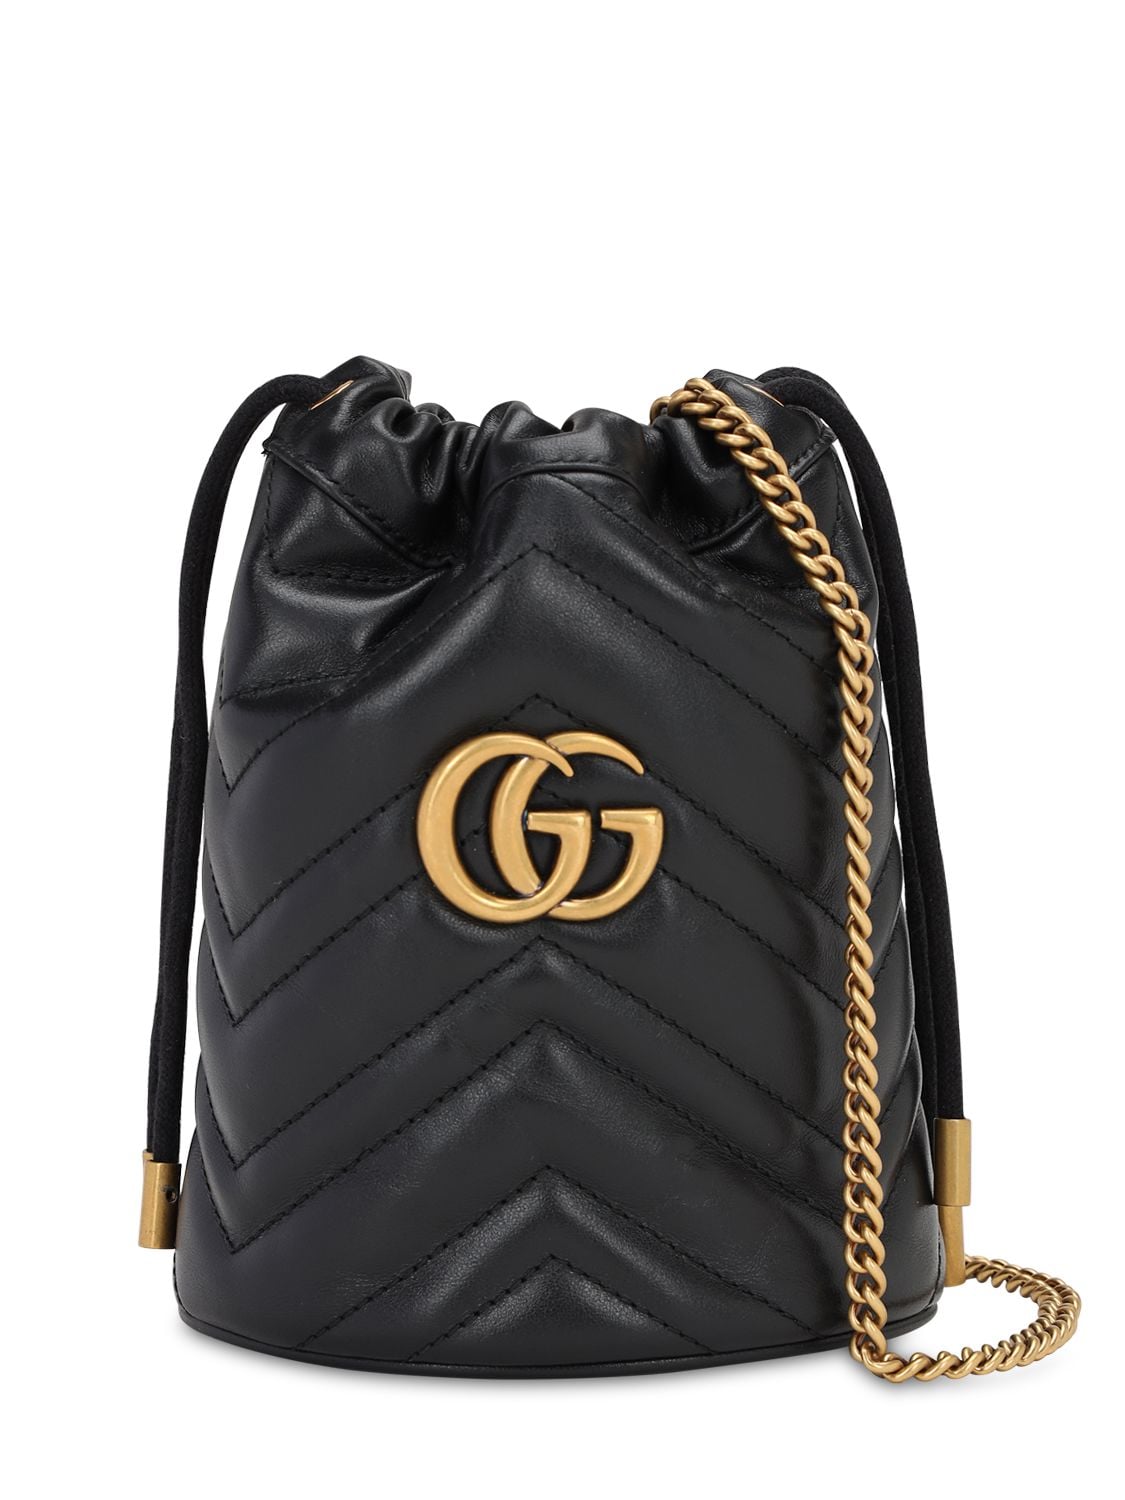 Gg Marmont 2.0 レザーバケットバッグ